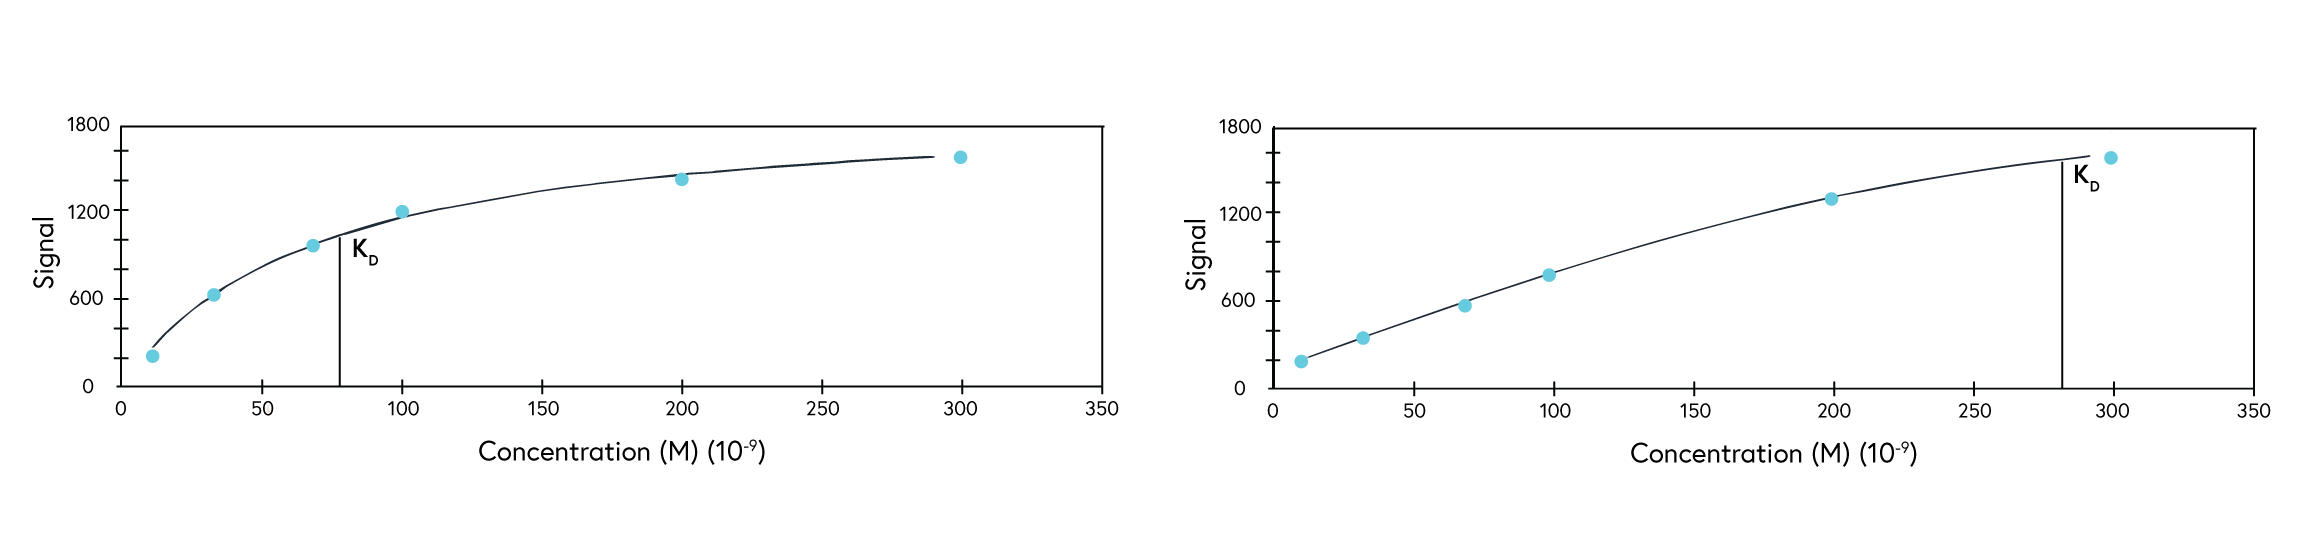 Figure 4 showing the analyte concentration range for steady state affinity analysis should cover a range twice the KD value (left). If the affinity constants are higher than half the highest analyte concentration, they should not be trusted (right).